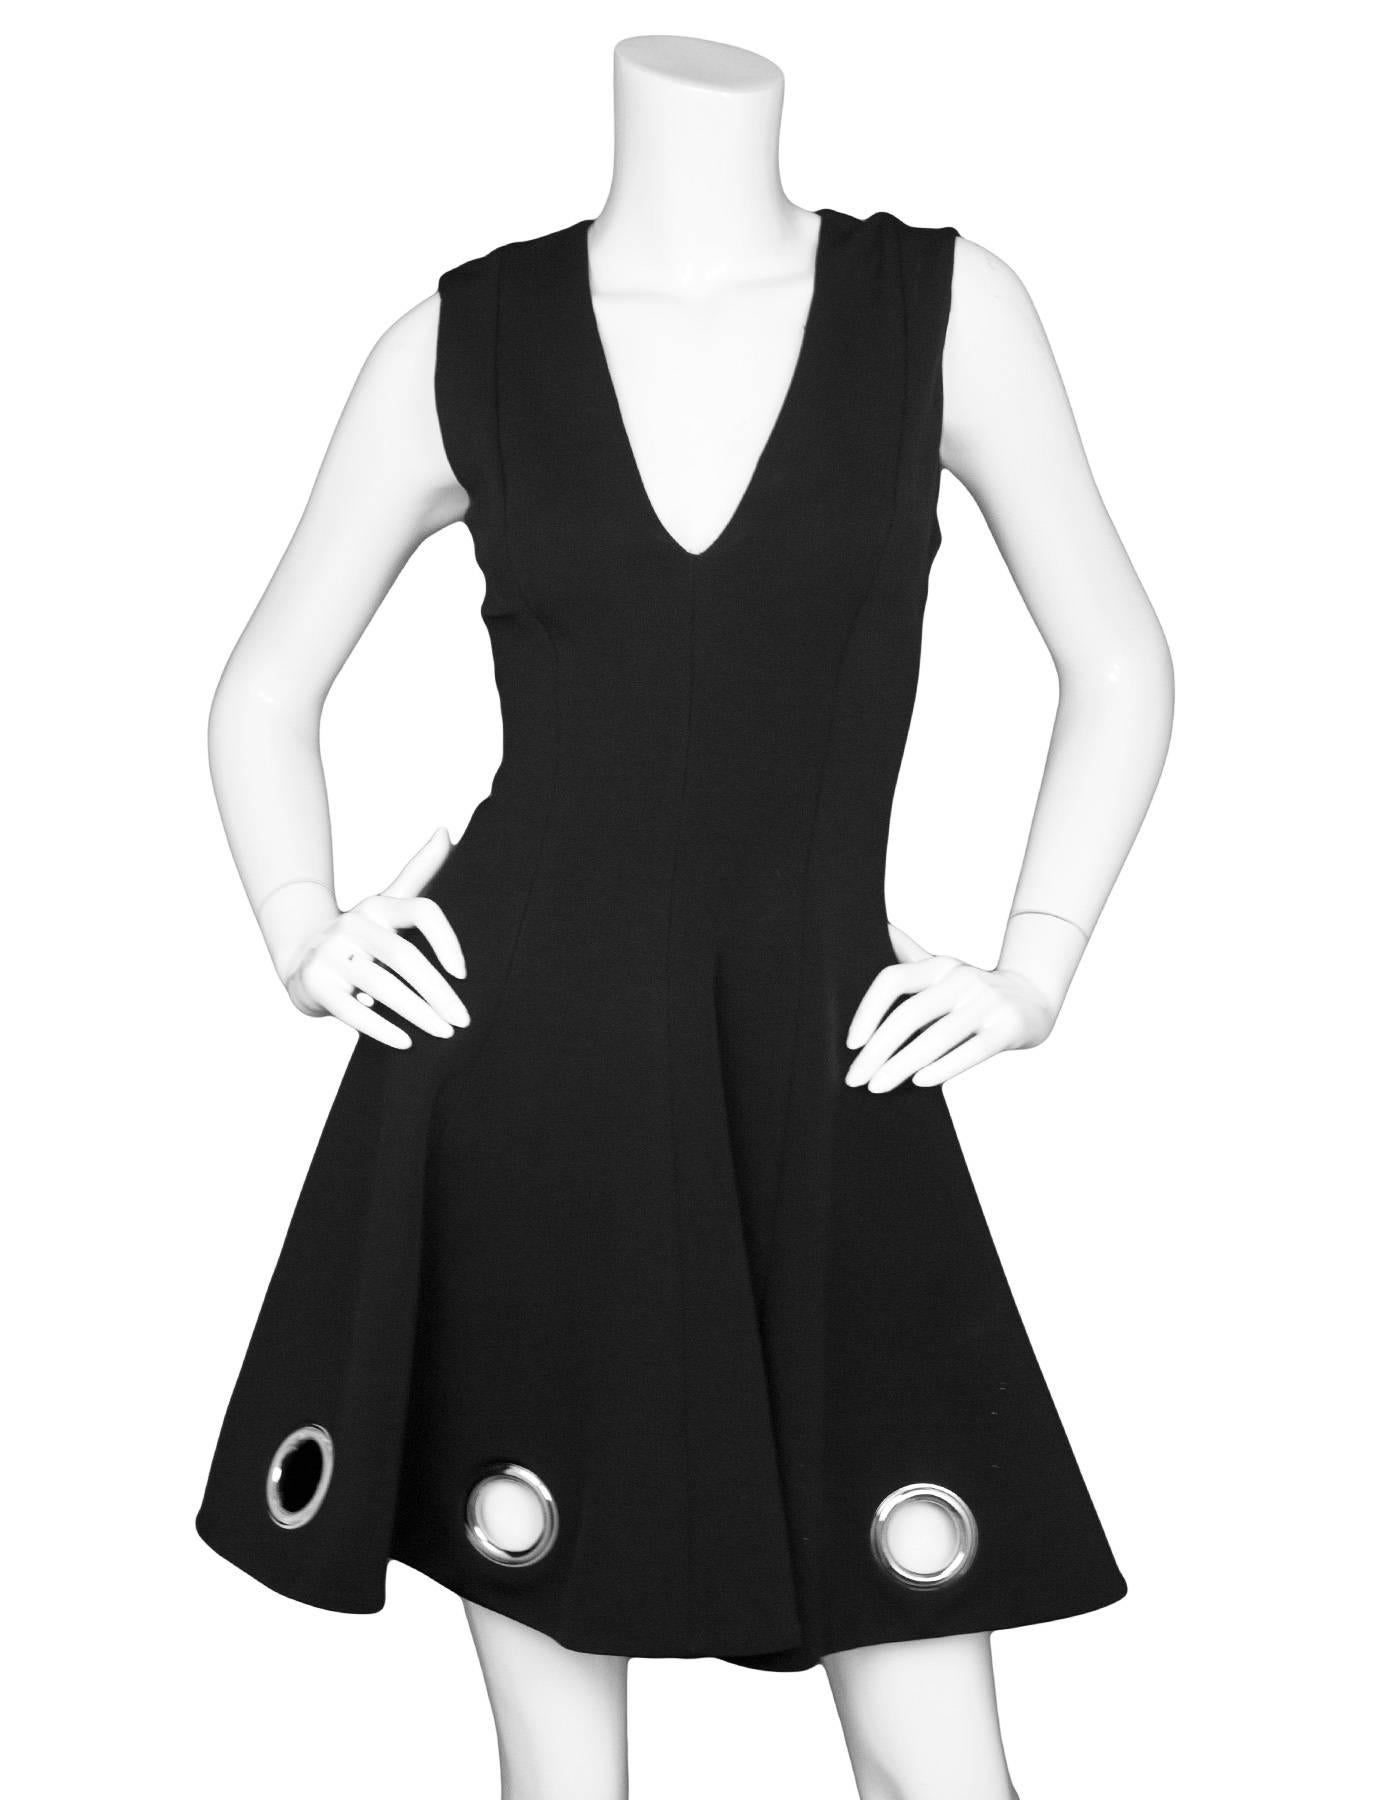 Cushnie et Ochs Black Flare Dress with Grommets Sz 2

Features large grommet detail at hem

Made In: USA
Color: Black
Composition: 86% viscose, 10% nylon, 4% elastane
Lining: Black silk
Closure/Opening: Zip closure at back
Retail Price: $1,275 +